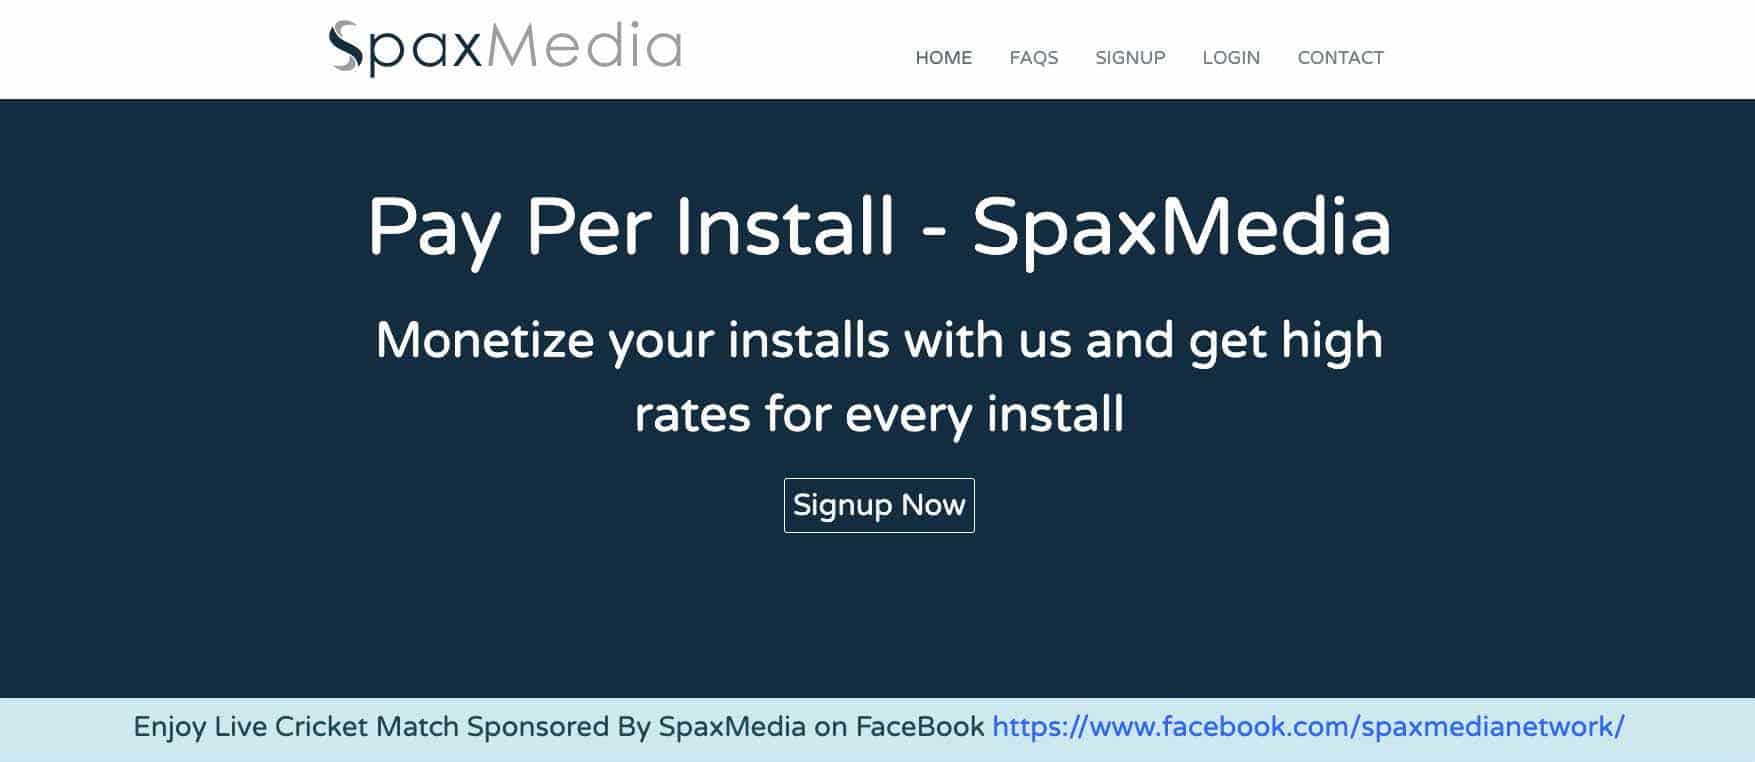 About SpaxMedia and SpaxMedia publishers